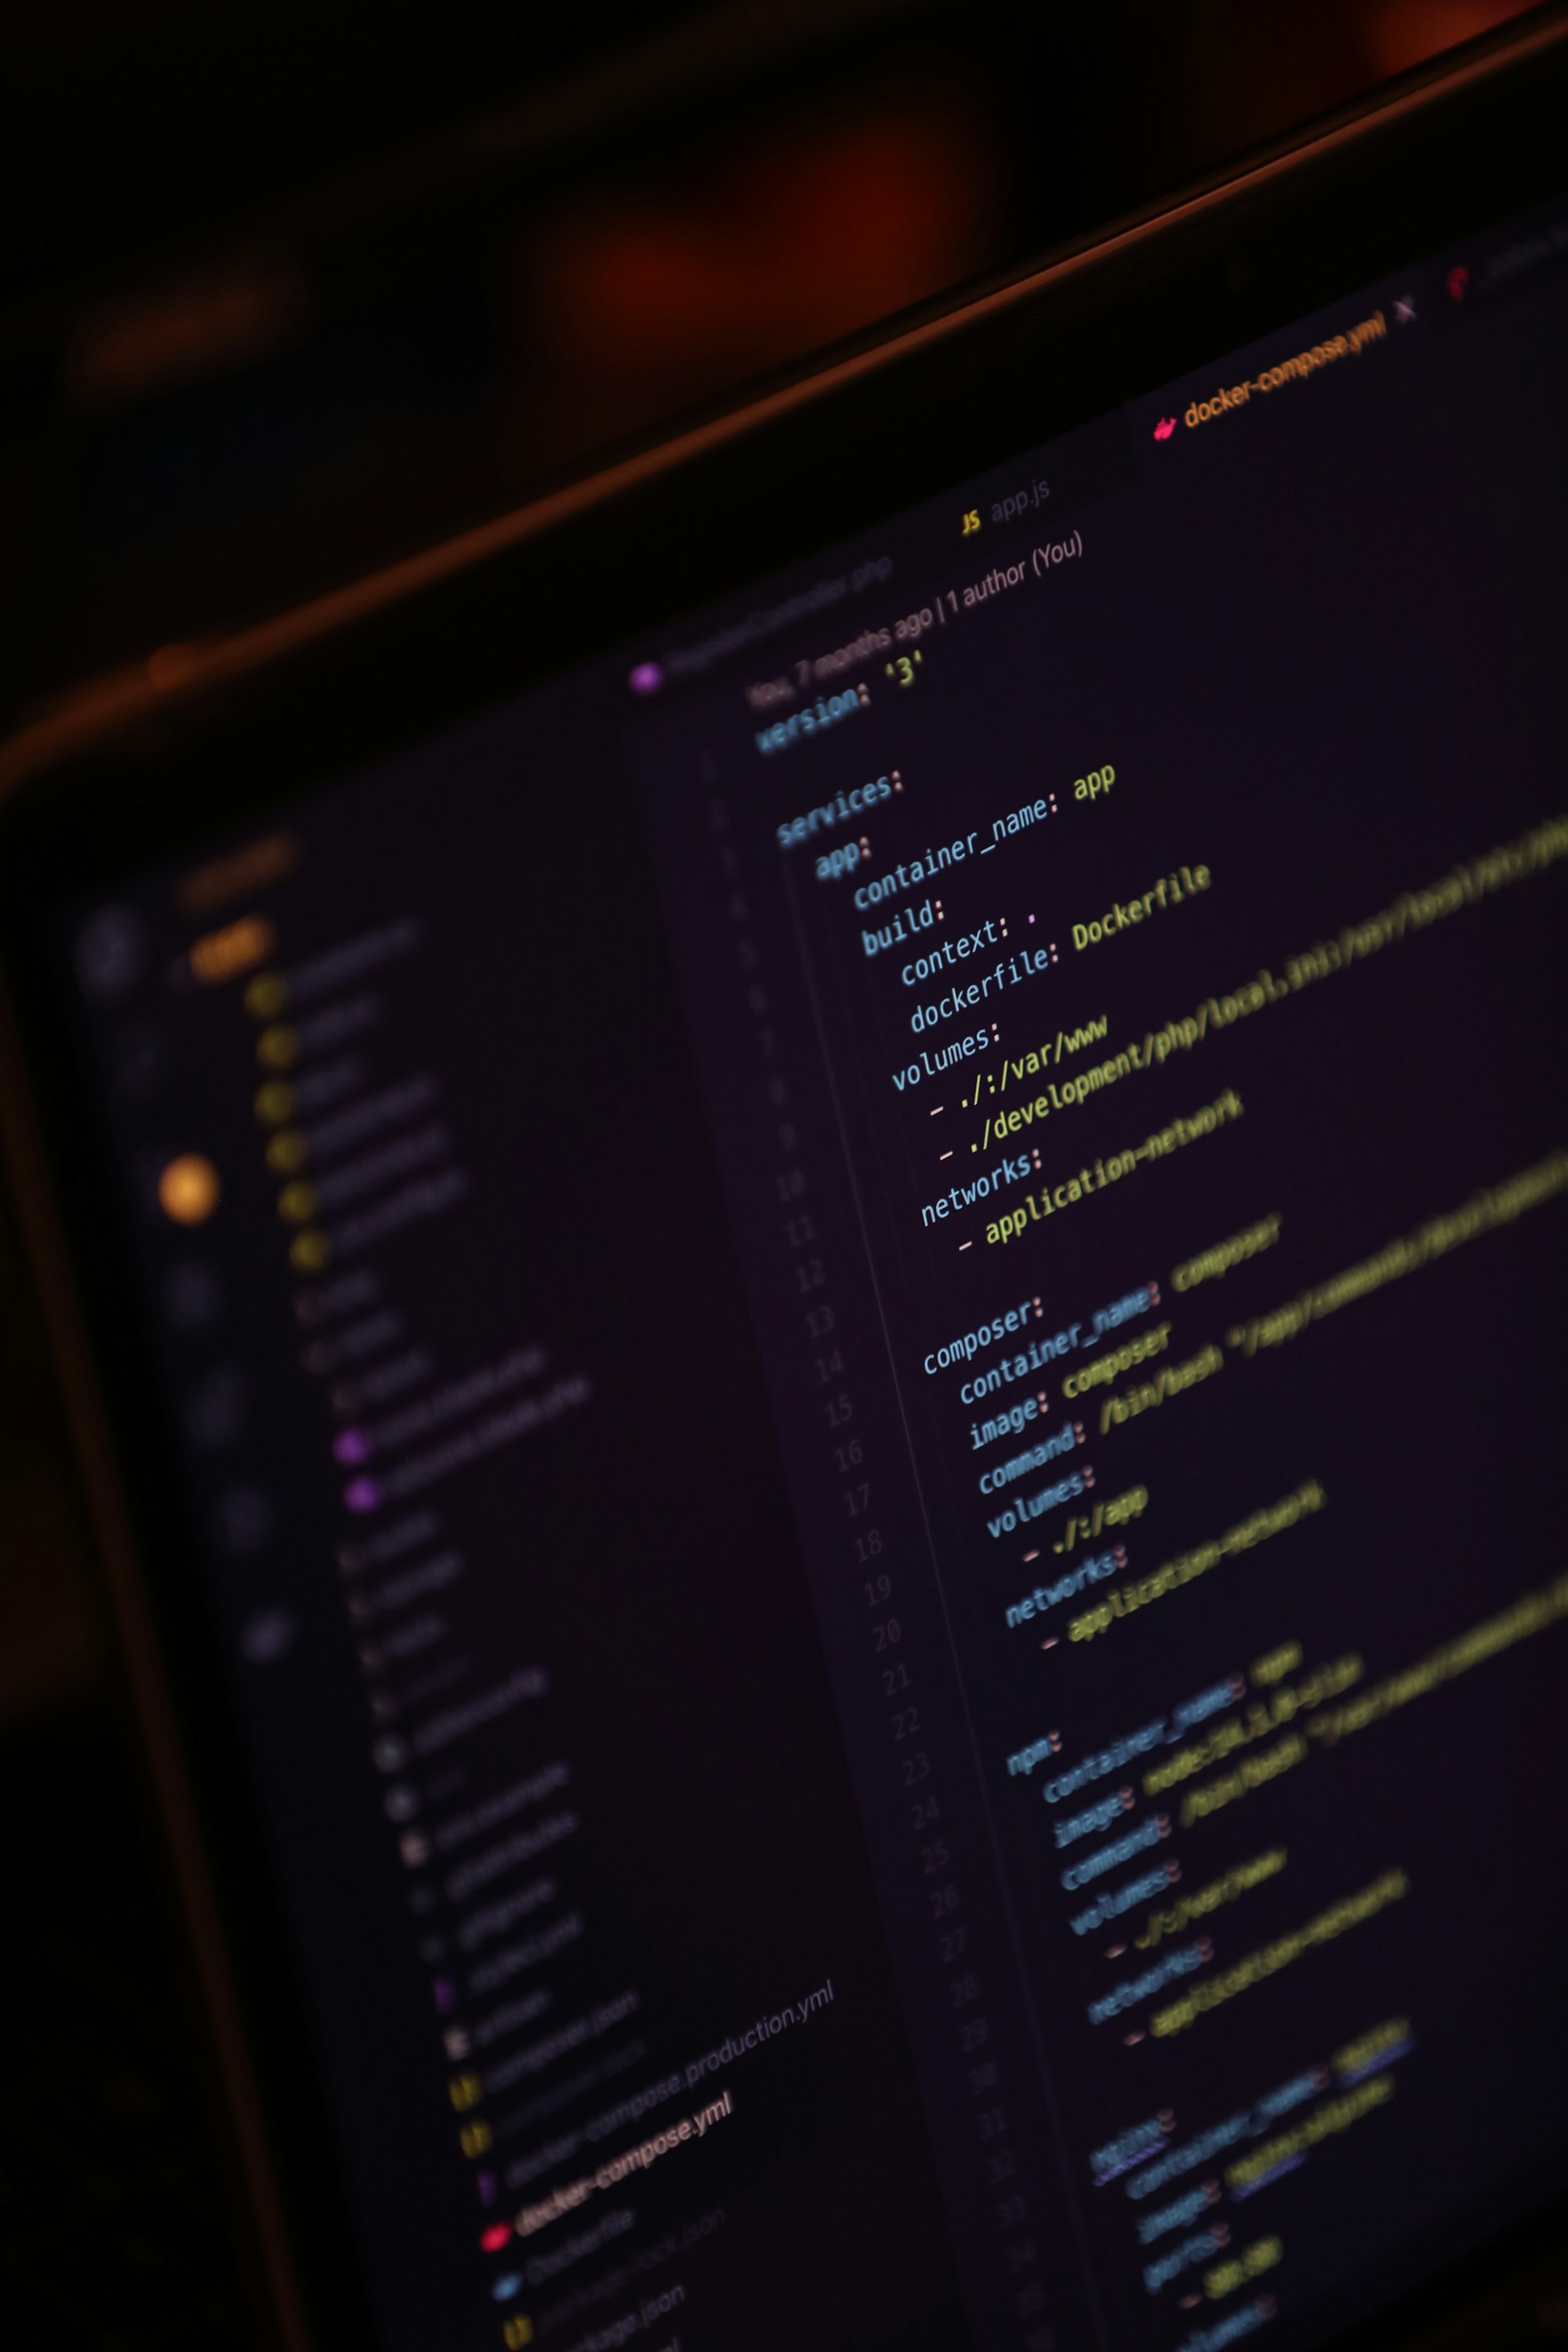 Visual Studio Code is an integrated development environment made by Microsoft for Windows, Linux, and macOS. Features include support for debugging, syntax highlighting, intelligent code completion, snippets, code refactoring, and embedded Git.